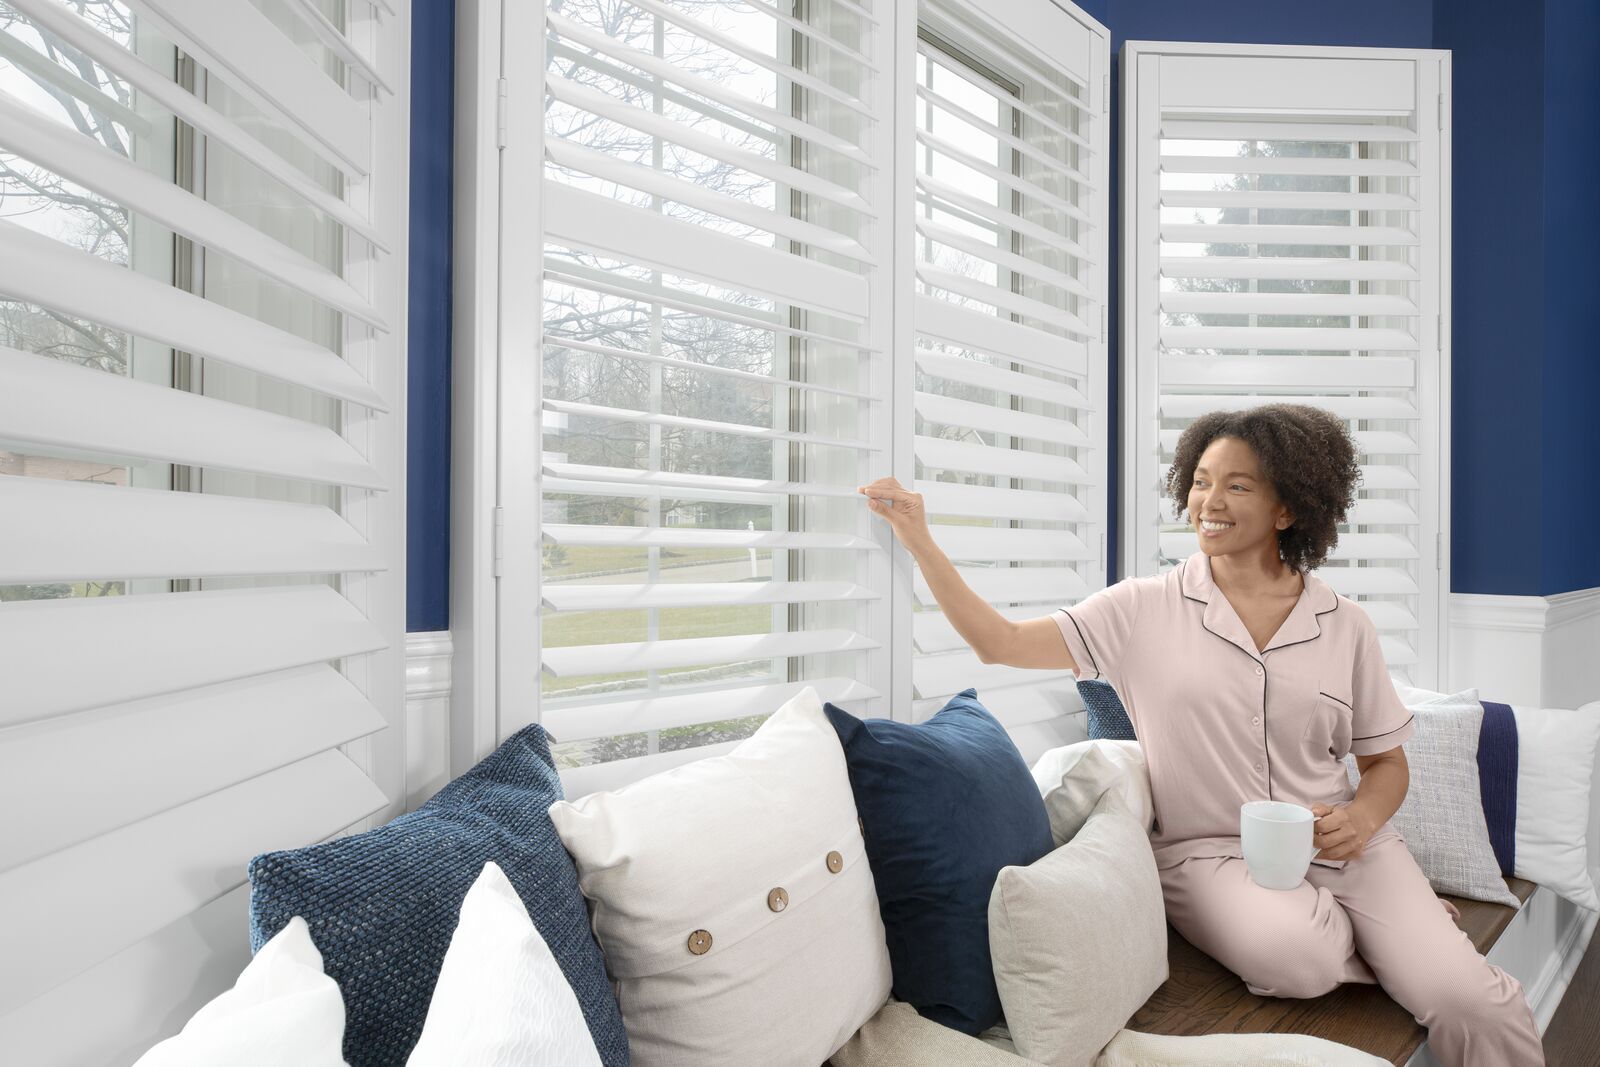 A woman smiles as she adjusts the slats of the indoor shutters on a large bay window.